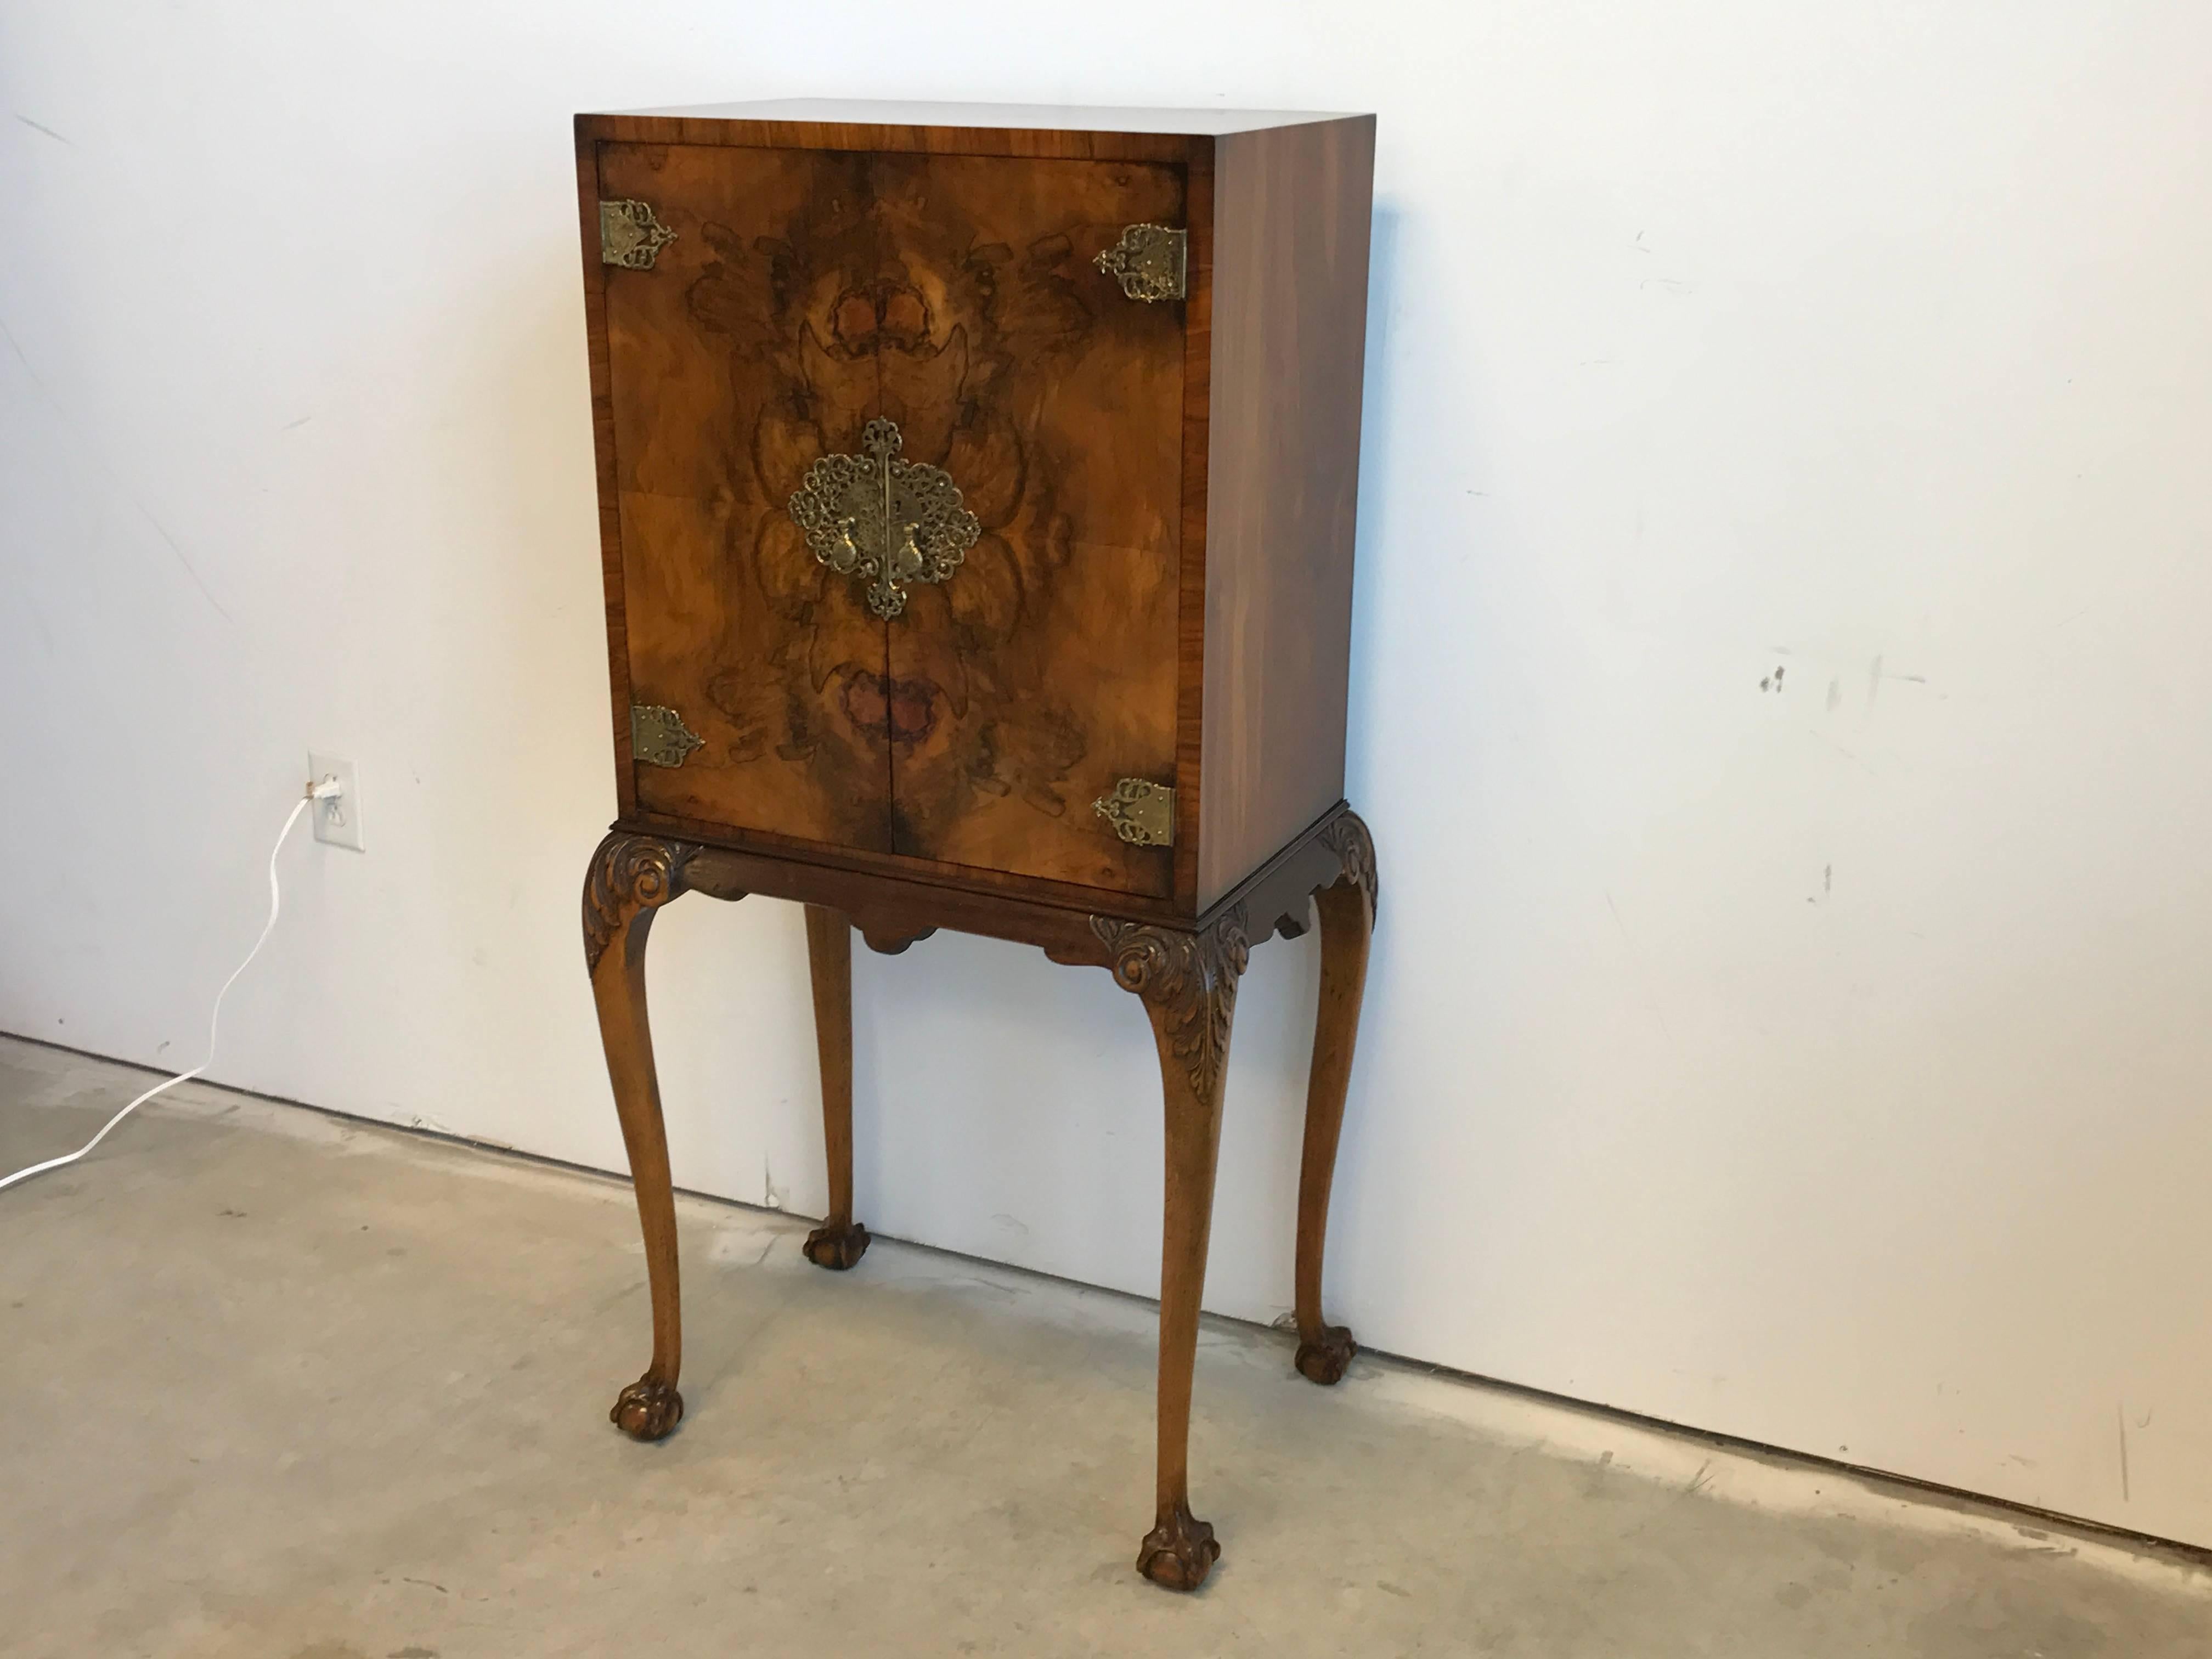 Offered is an absolutely stunning, 19th century maple-burl wood bar cabinet. This piece is a showstopper with its gorgeous and ornate brass detailing and claw feet detailing. Inside has an upper rack for glasses, beneath is a glass and wood serving